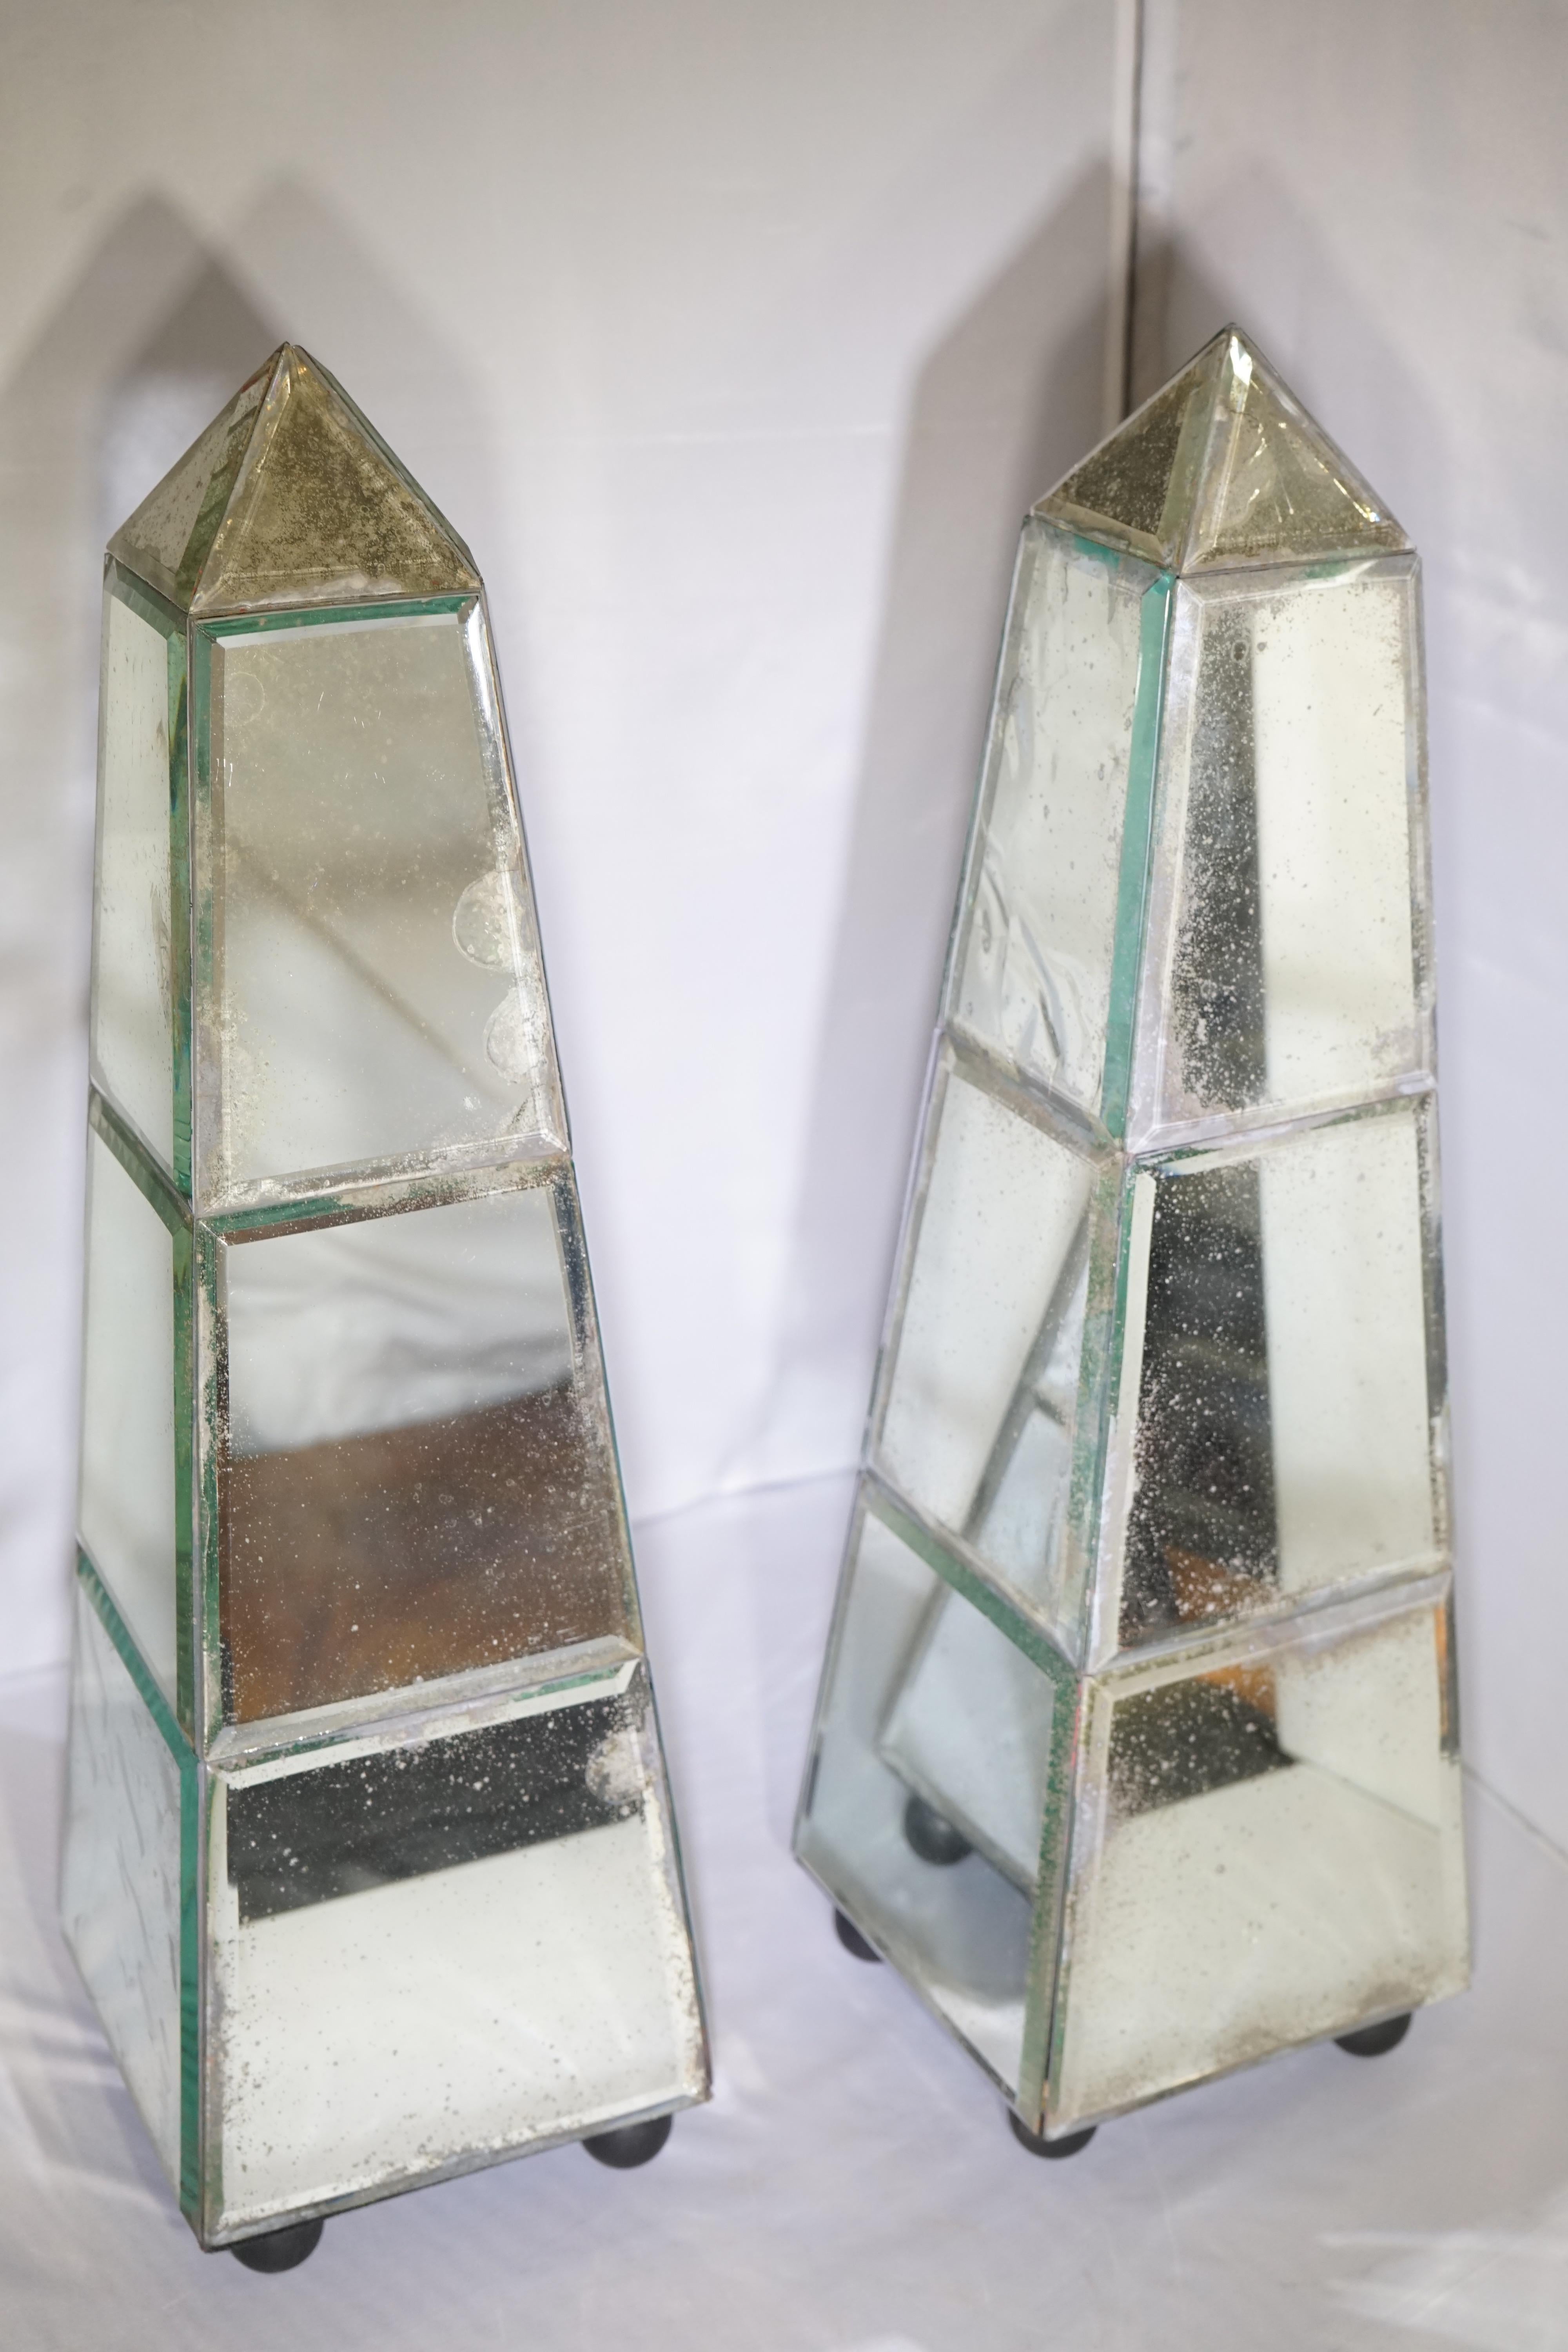 Mid-20th Century 1940s French Pair of Mirrored Obelisk Objet Sculptures